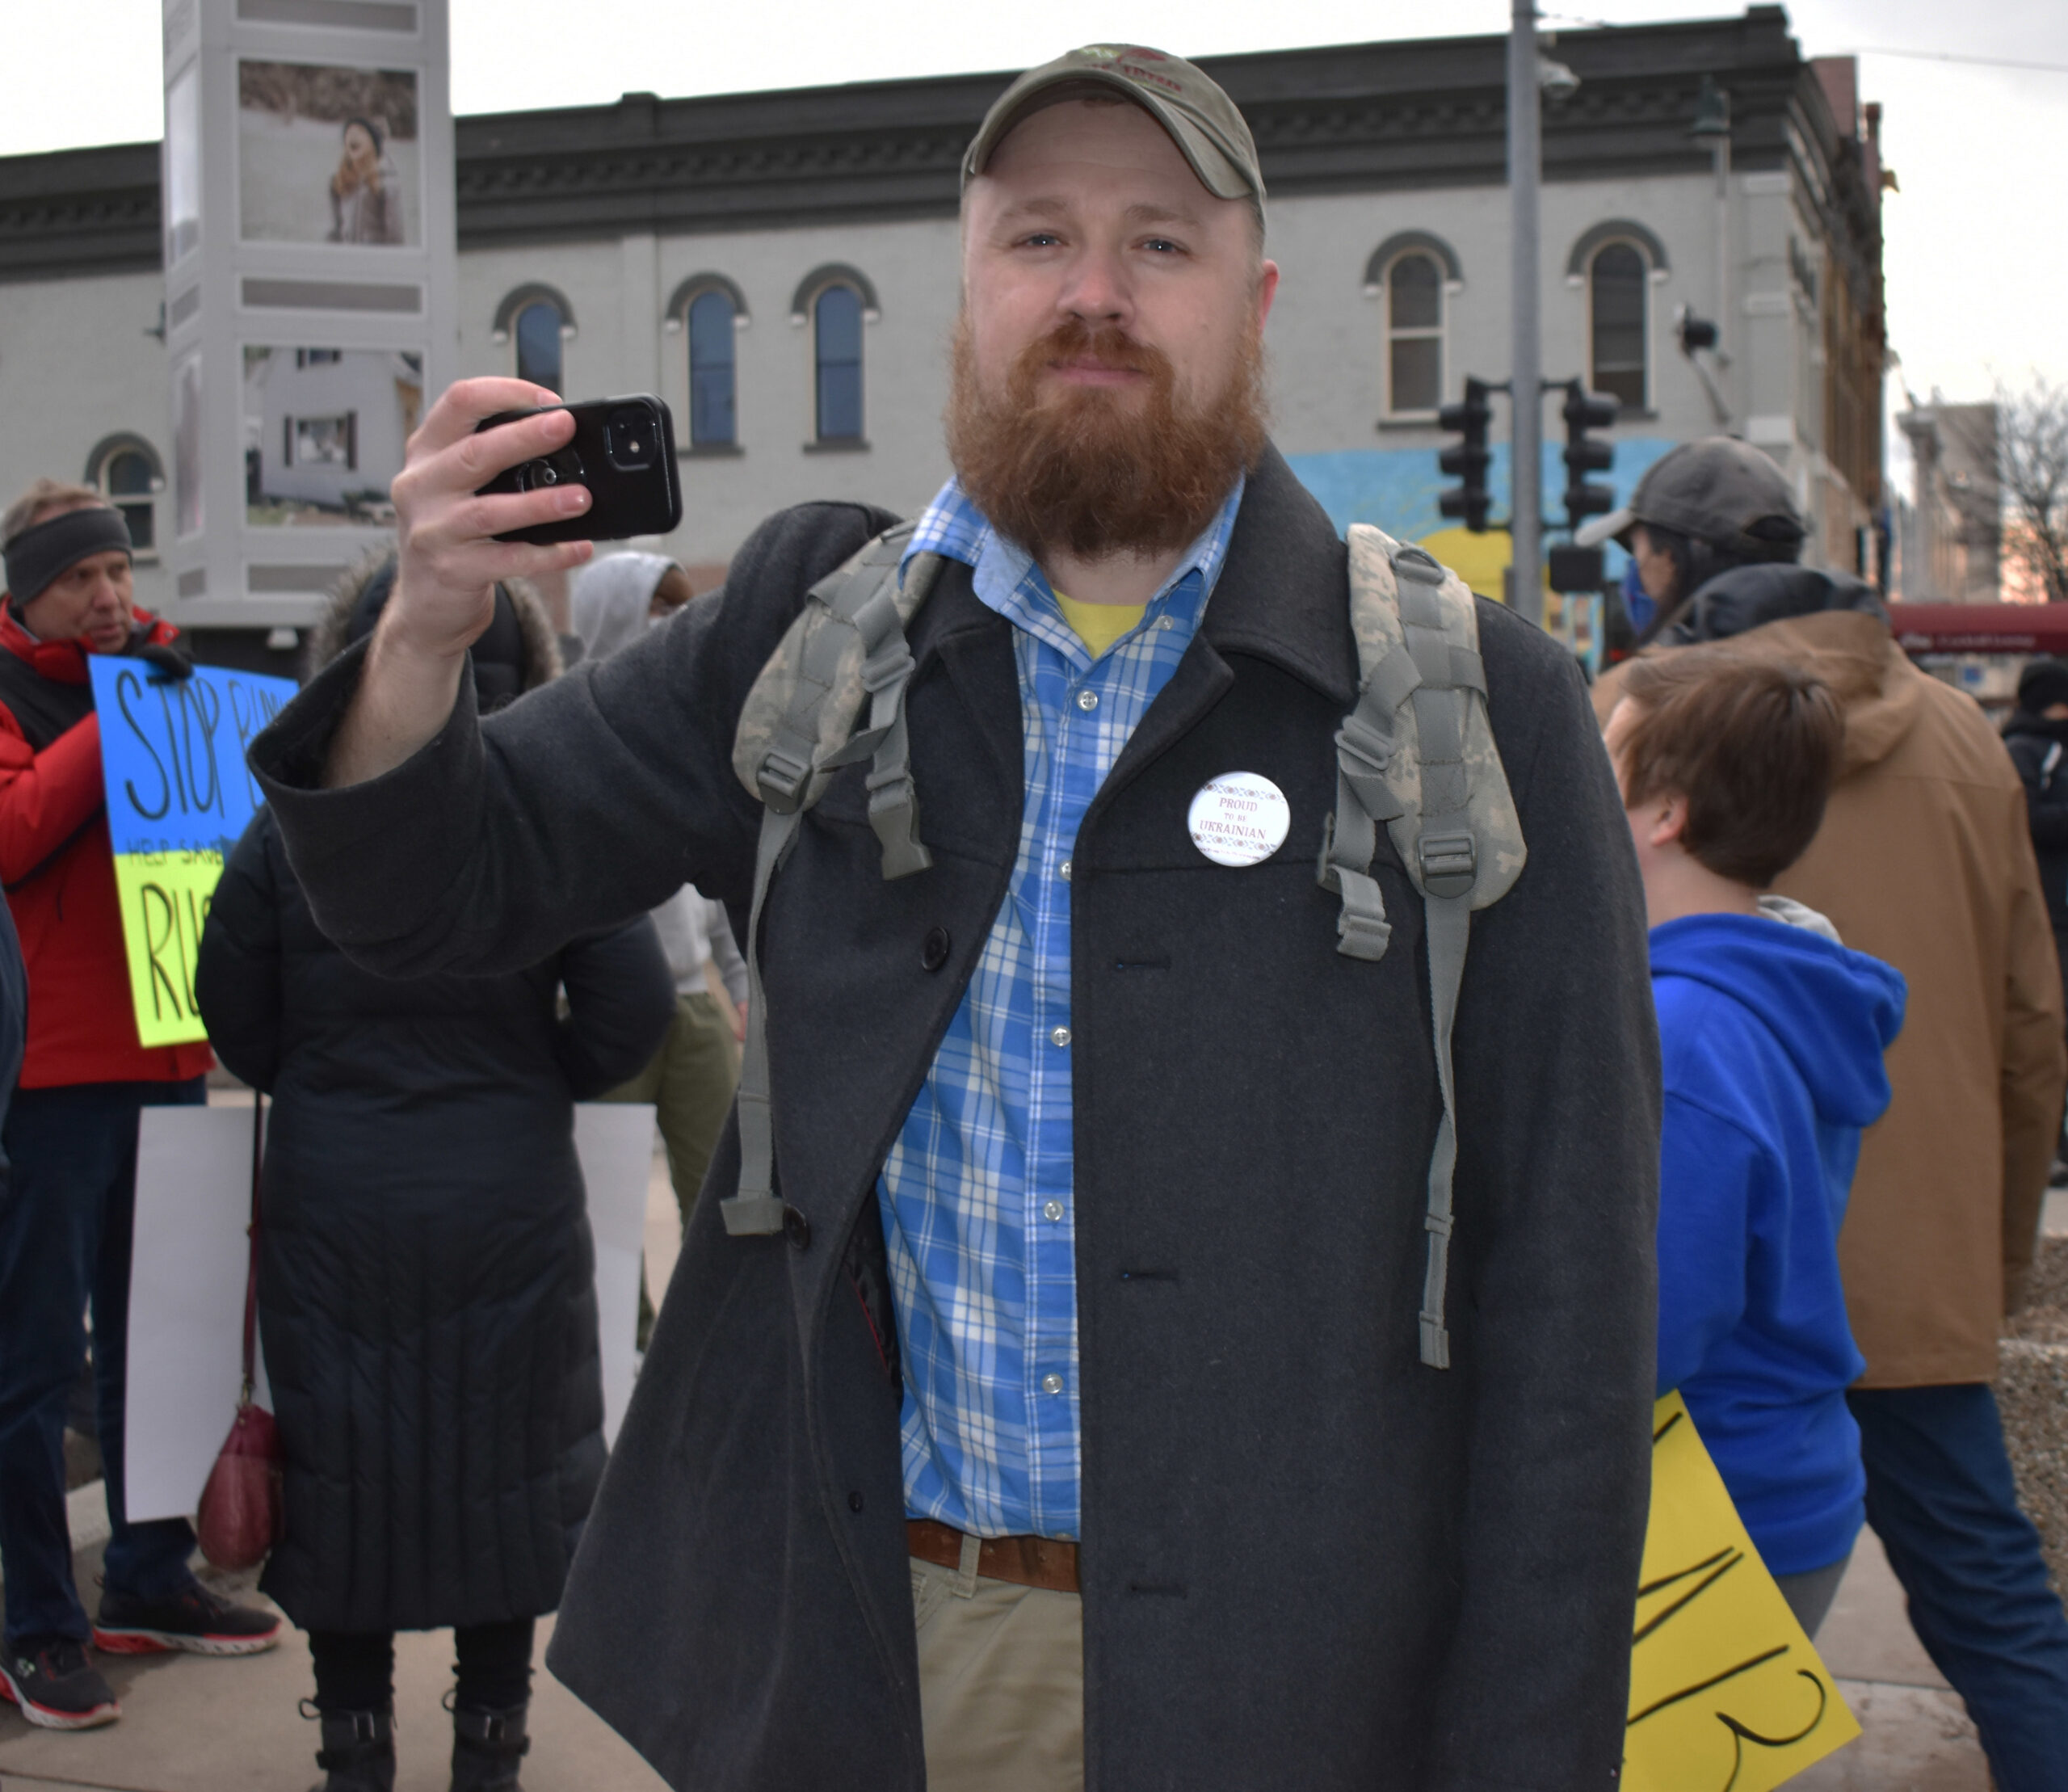 Jonathan Pylypiv livestreams to social media from the rally and donation event for Ukraine on Appleton's Houdini Plaza